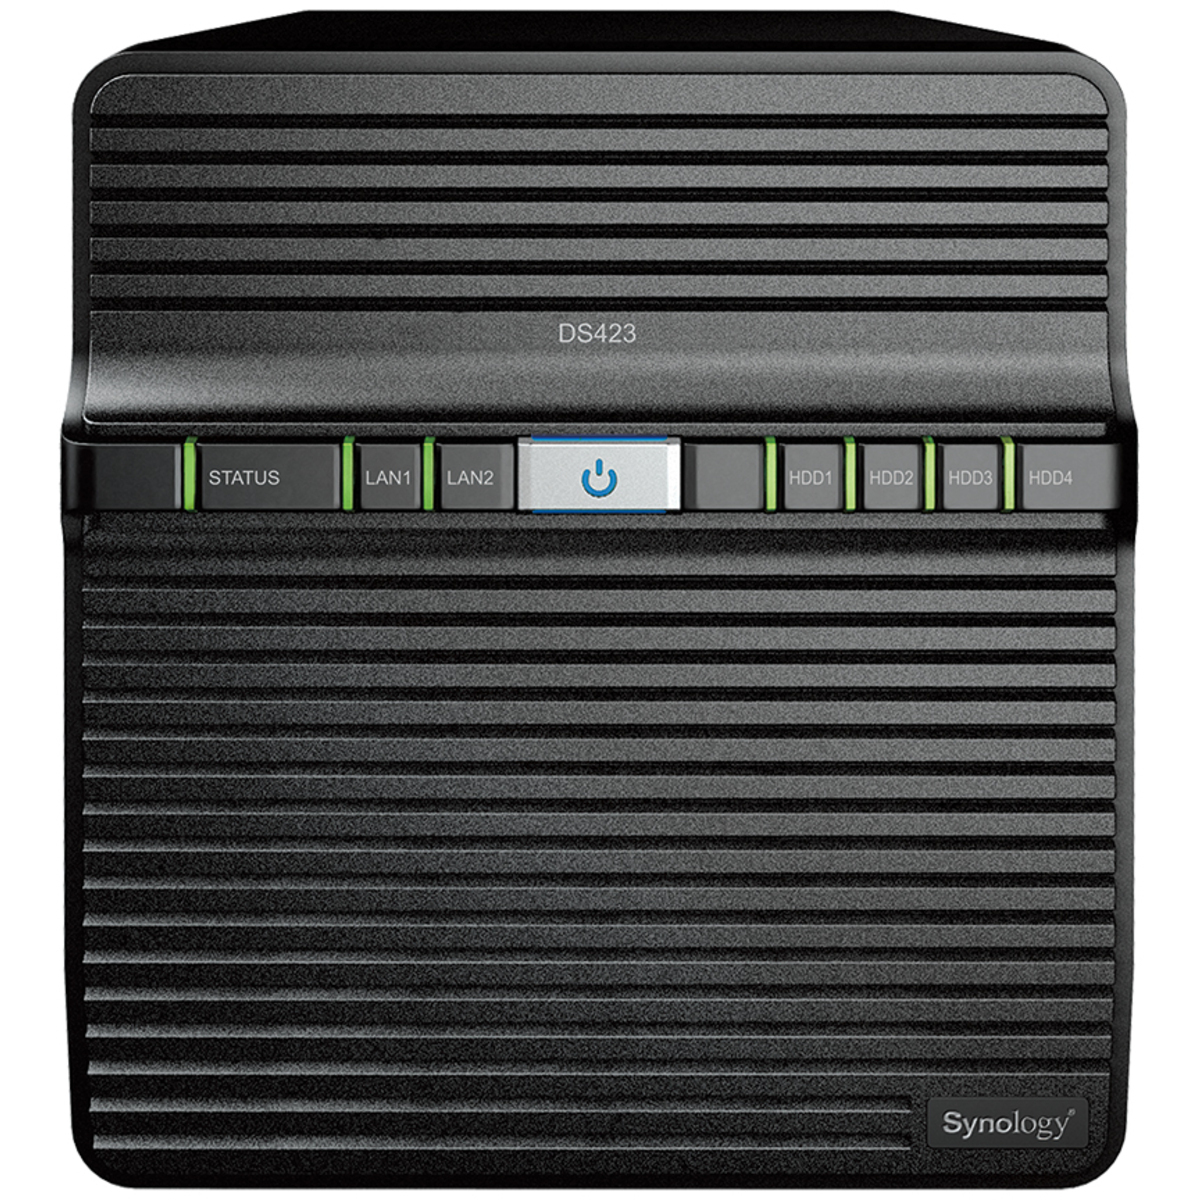 Synology DiskStation DS423 44tb 4-Bay Desktop Personal / Basic Home / Small Office NAS - Network Attached Storage Device 2x22tb Seagate IronWolf Pro ST22000NT001 3.5 7200rpm SATA 6Gb/s HDD NAS Class Drives Installed - Burn-In Tested DiskStation DS423